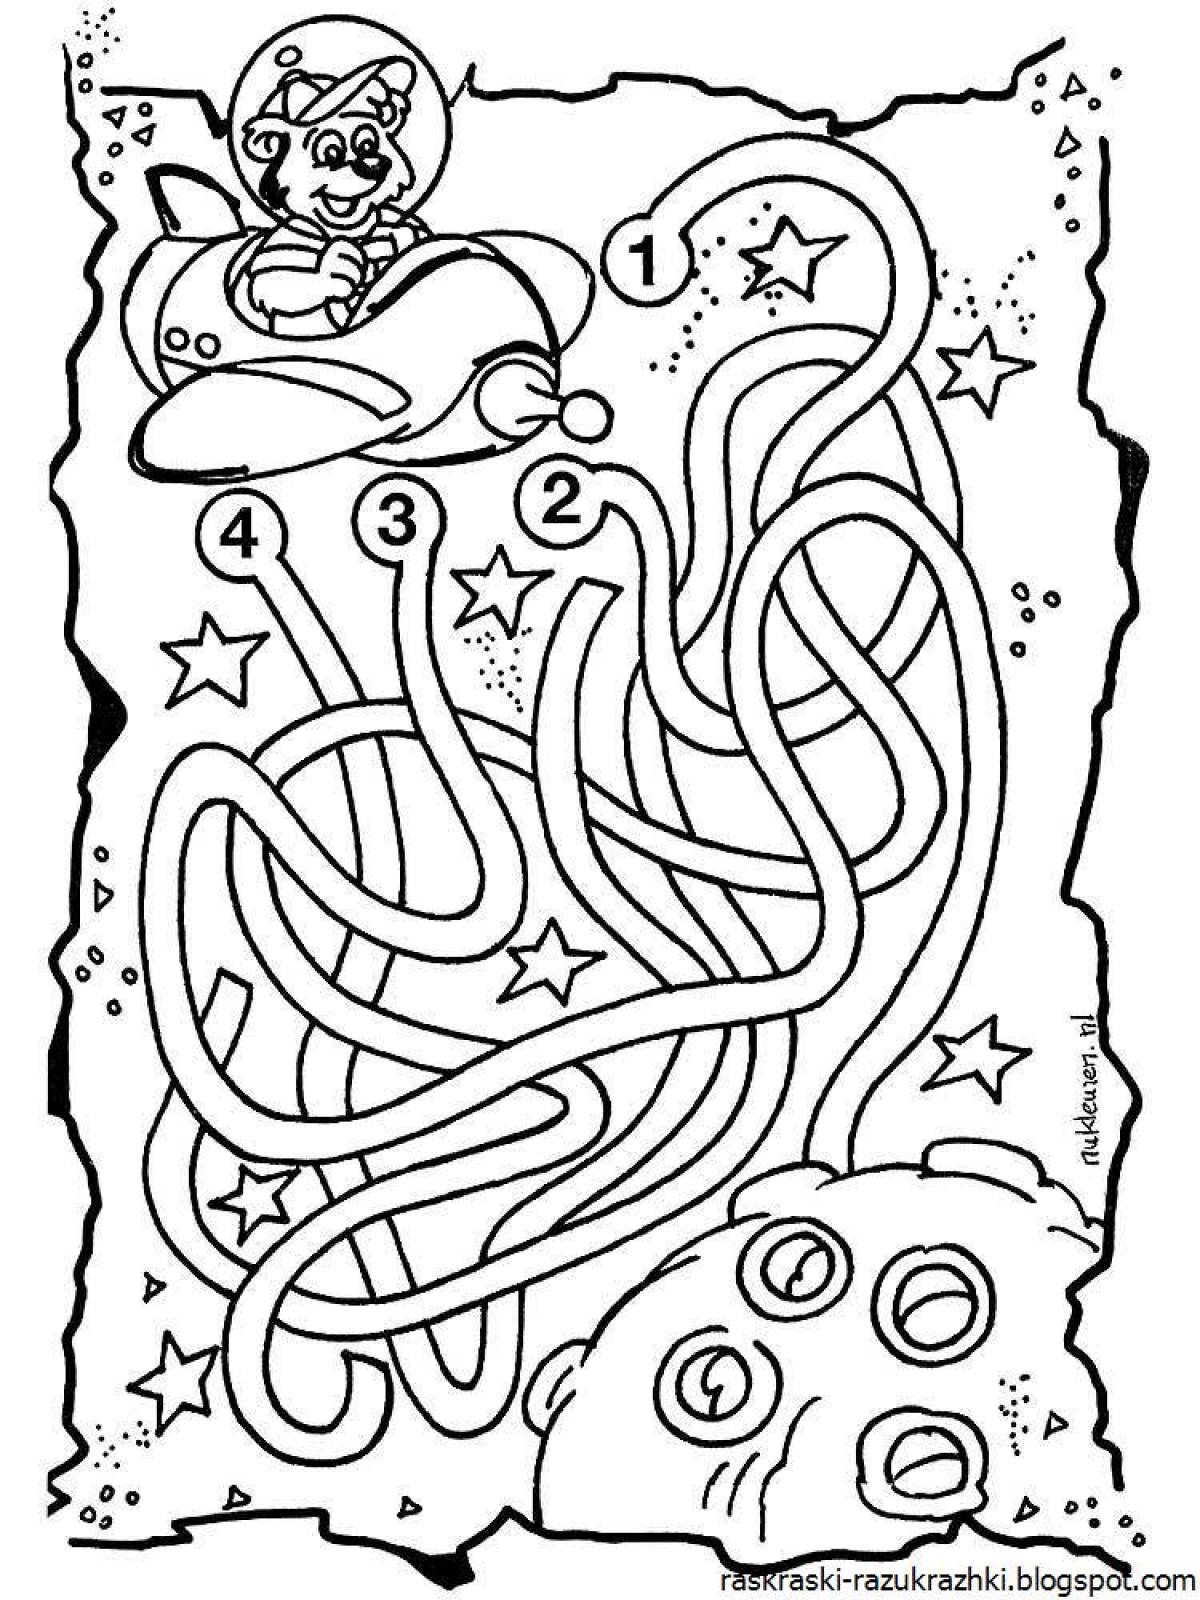 Majestic maze coloring page